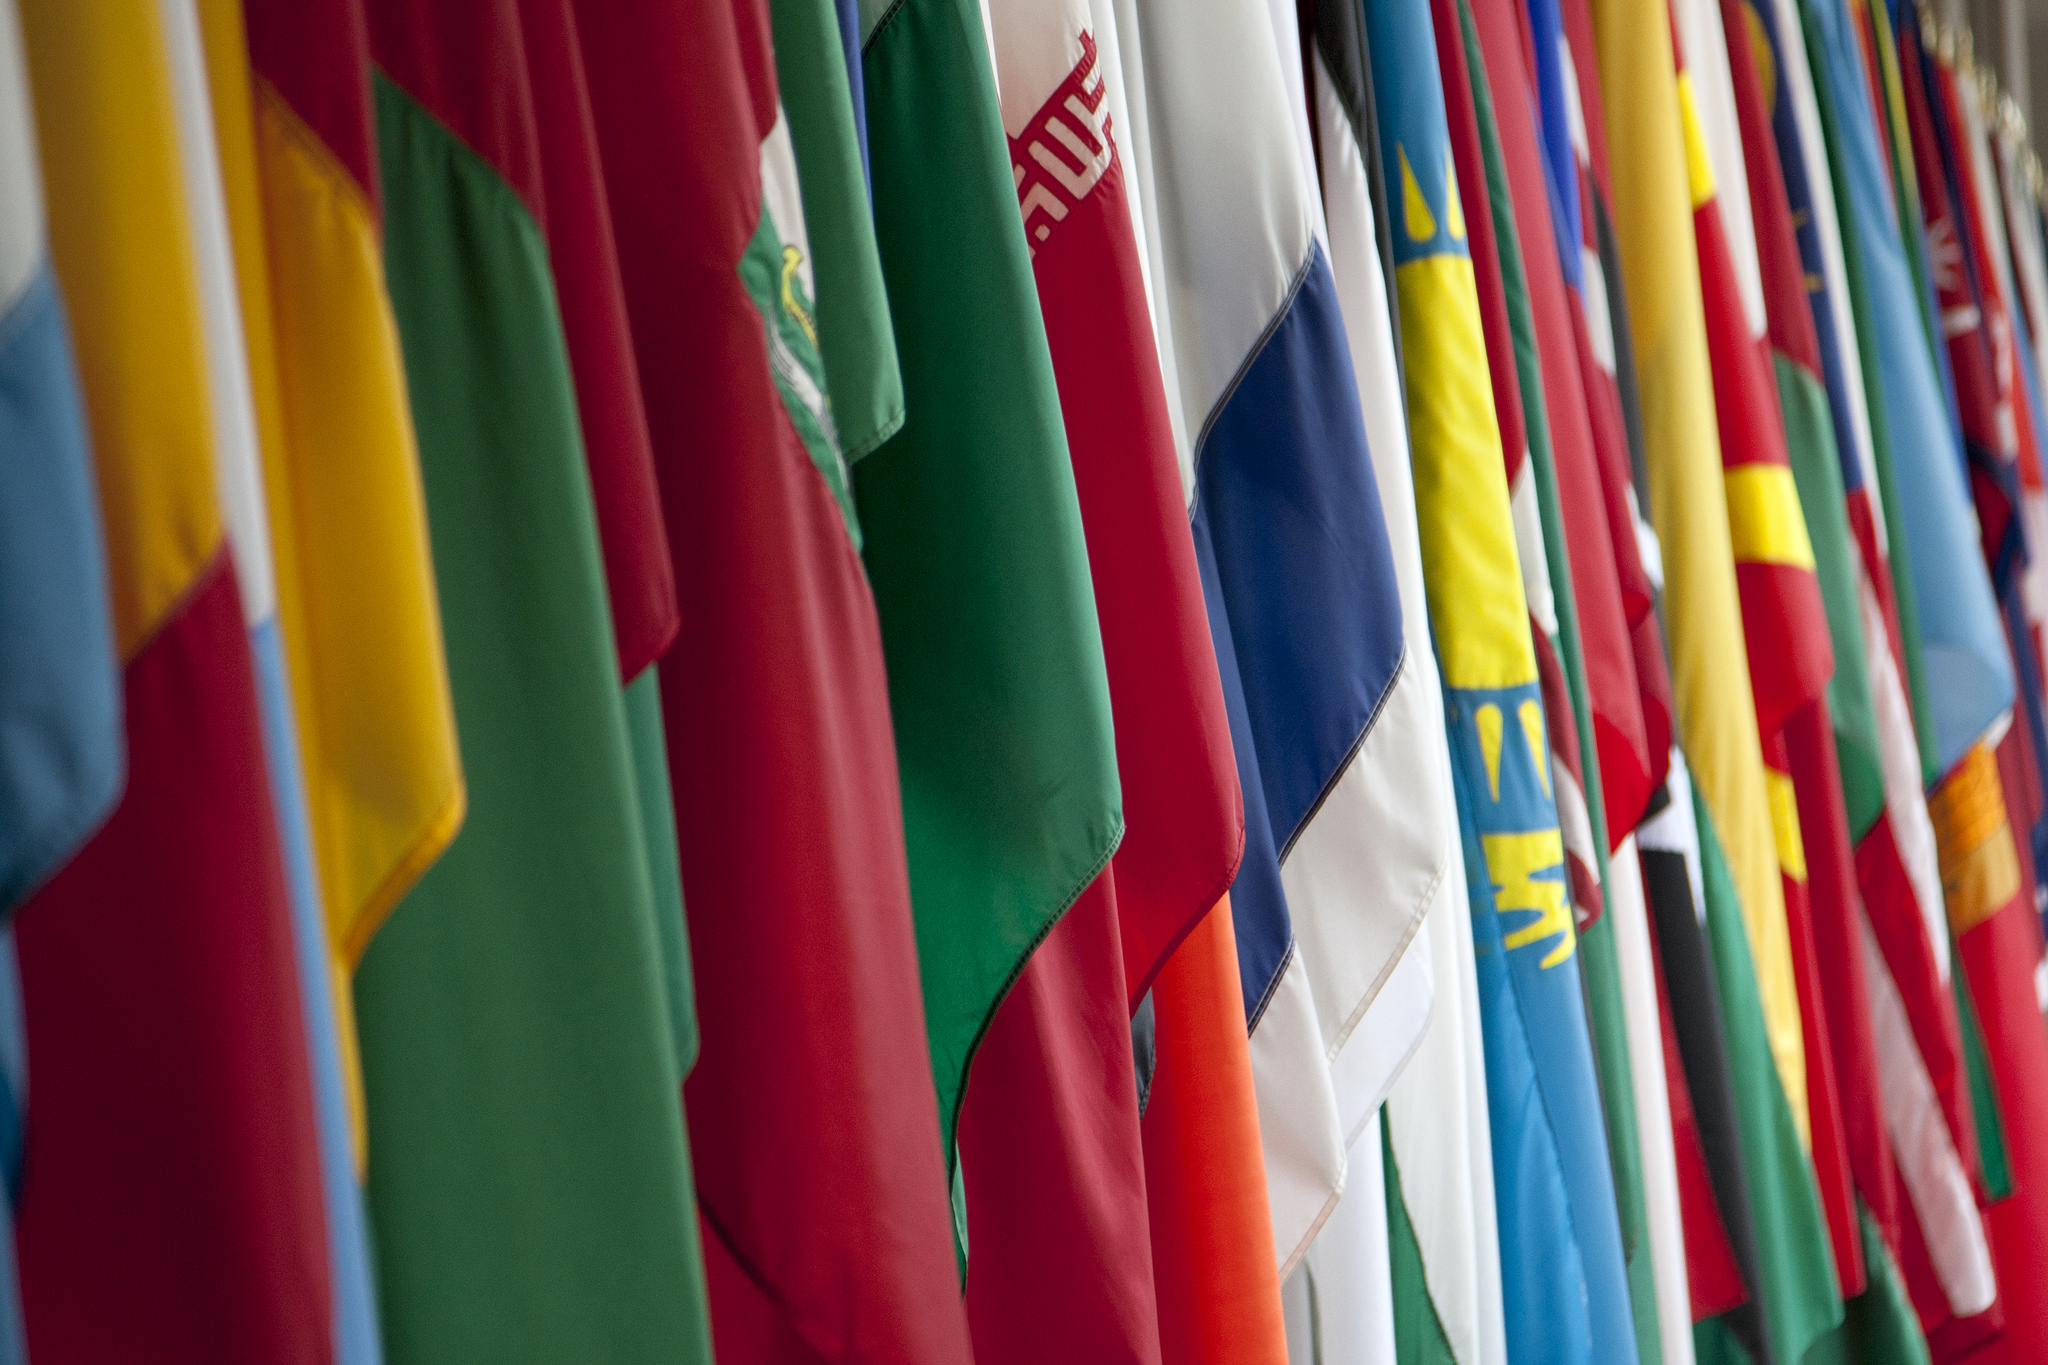 Flags, 2013 World Bank IMF Annual Meetings (World Bank/Flickr CC BY-NC-ND 2.0)